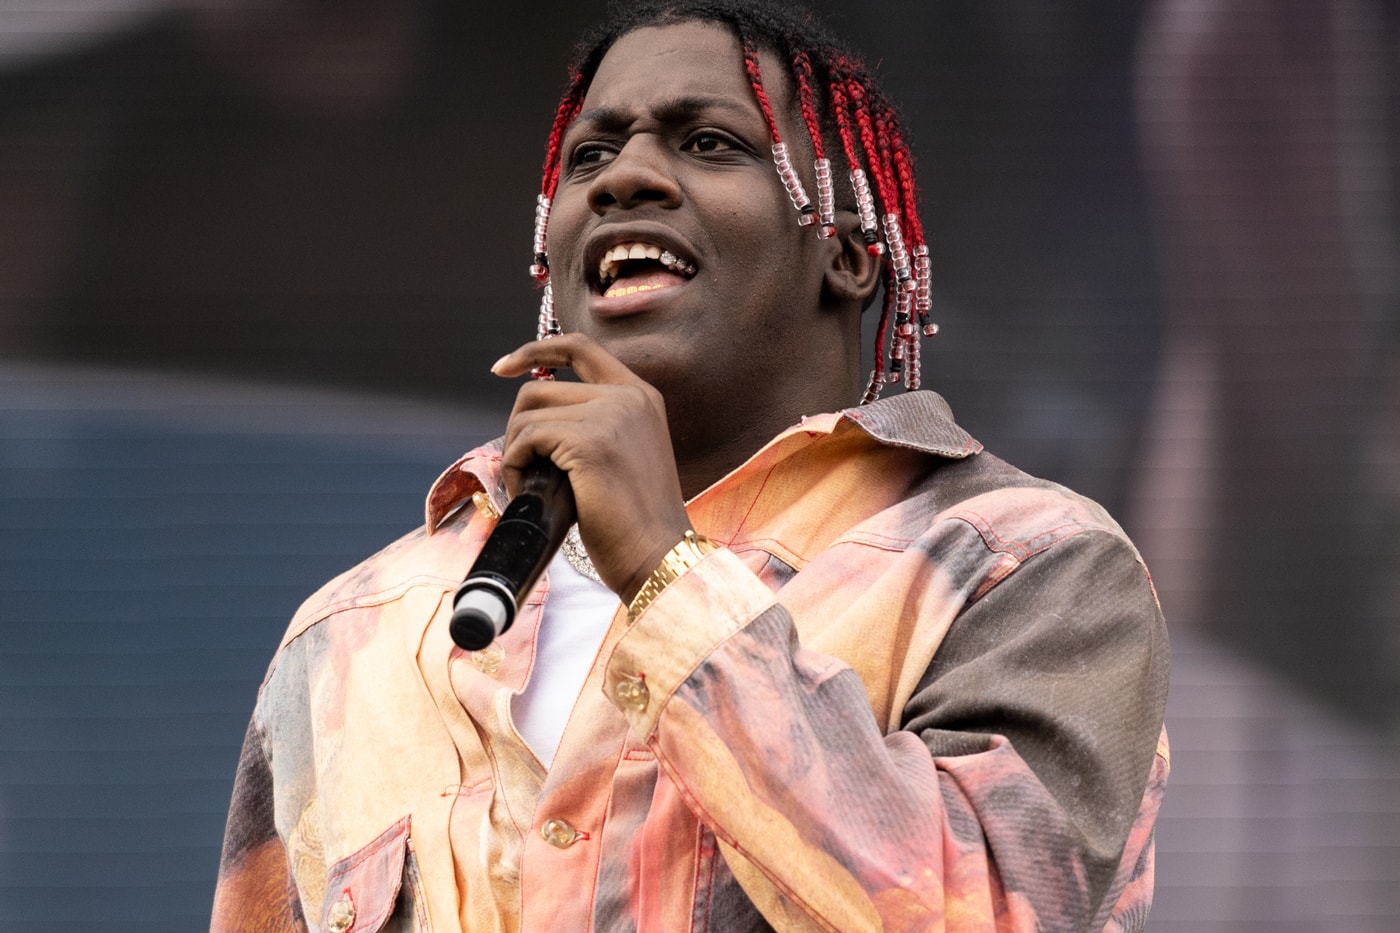 lil-yachty-shares-video-for-wanna-be-us